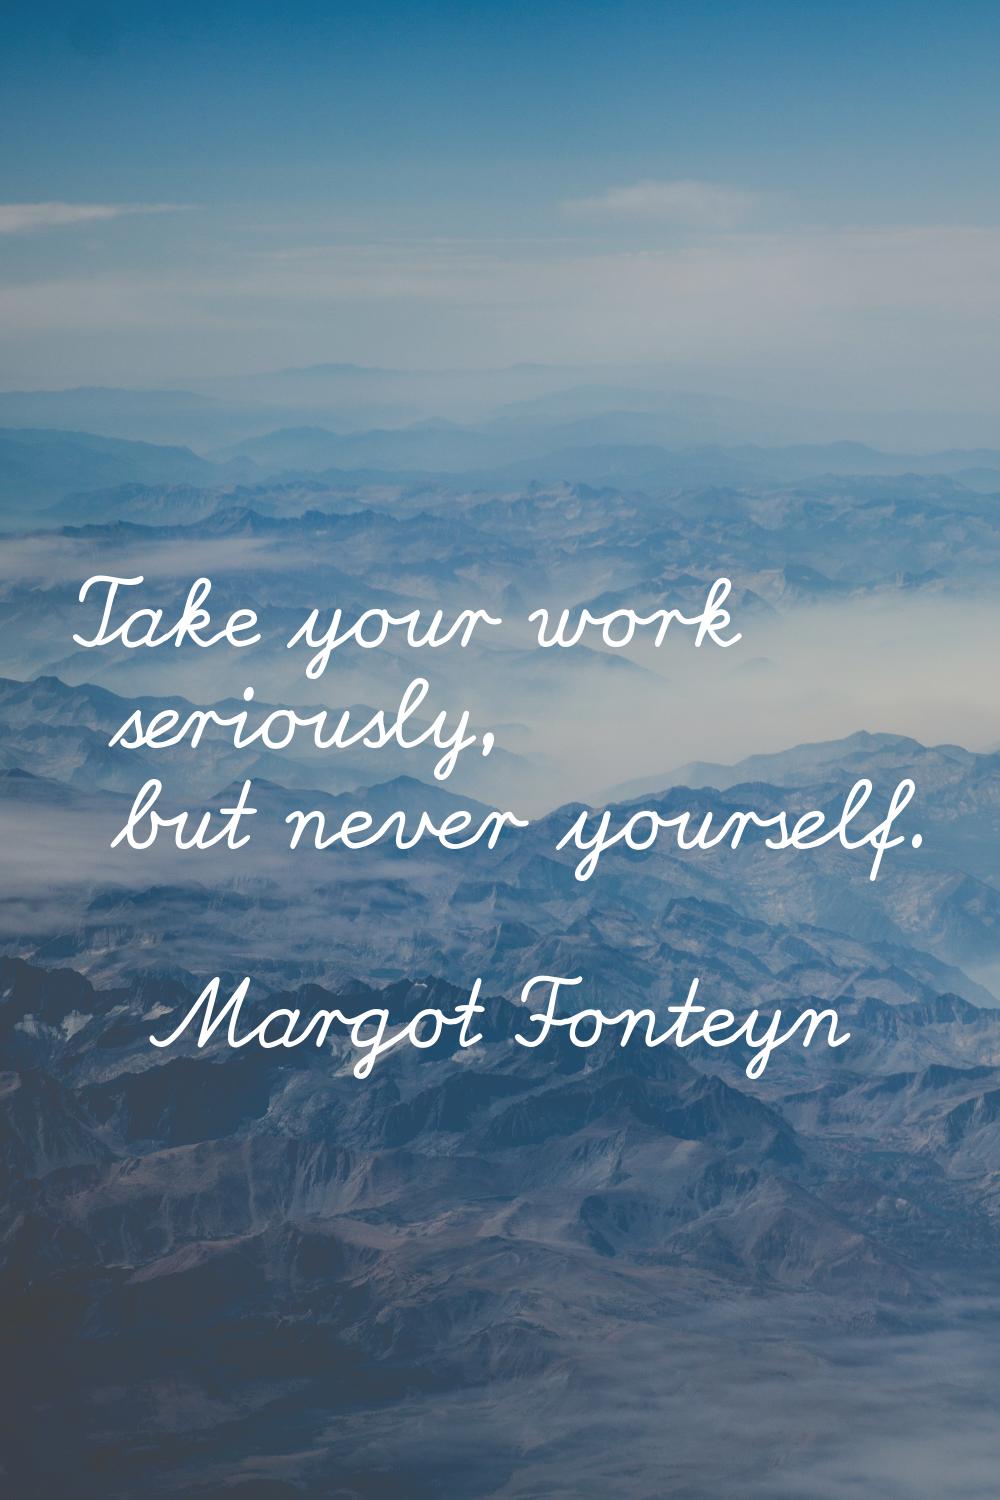 Take your work seriously, but never yourself.